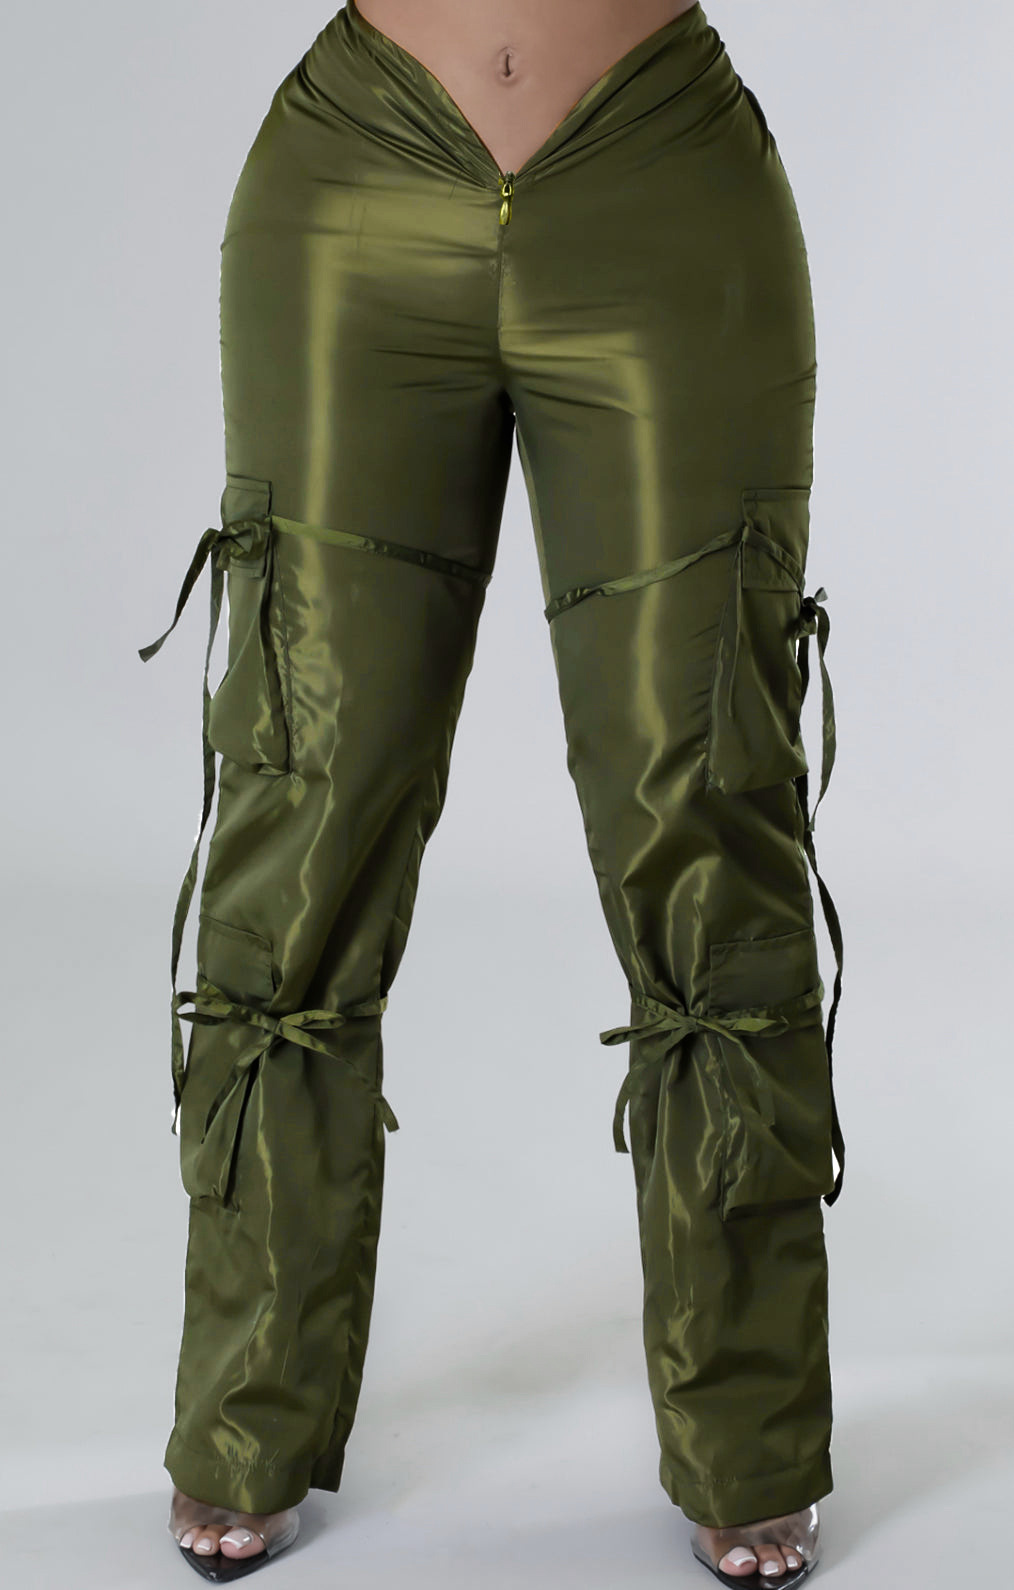 Women's Zip Lace-Up Solid Green Casual Trousers - The Little